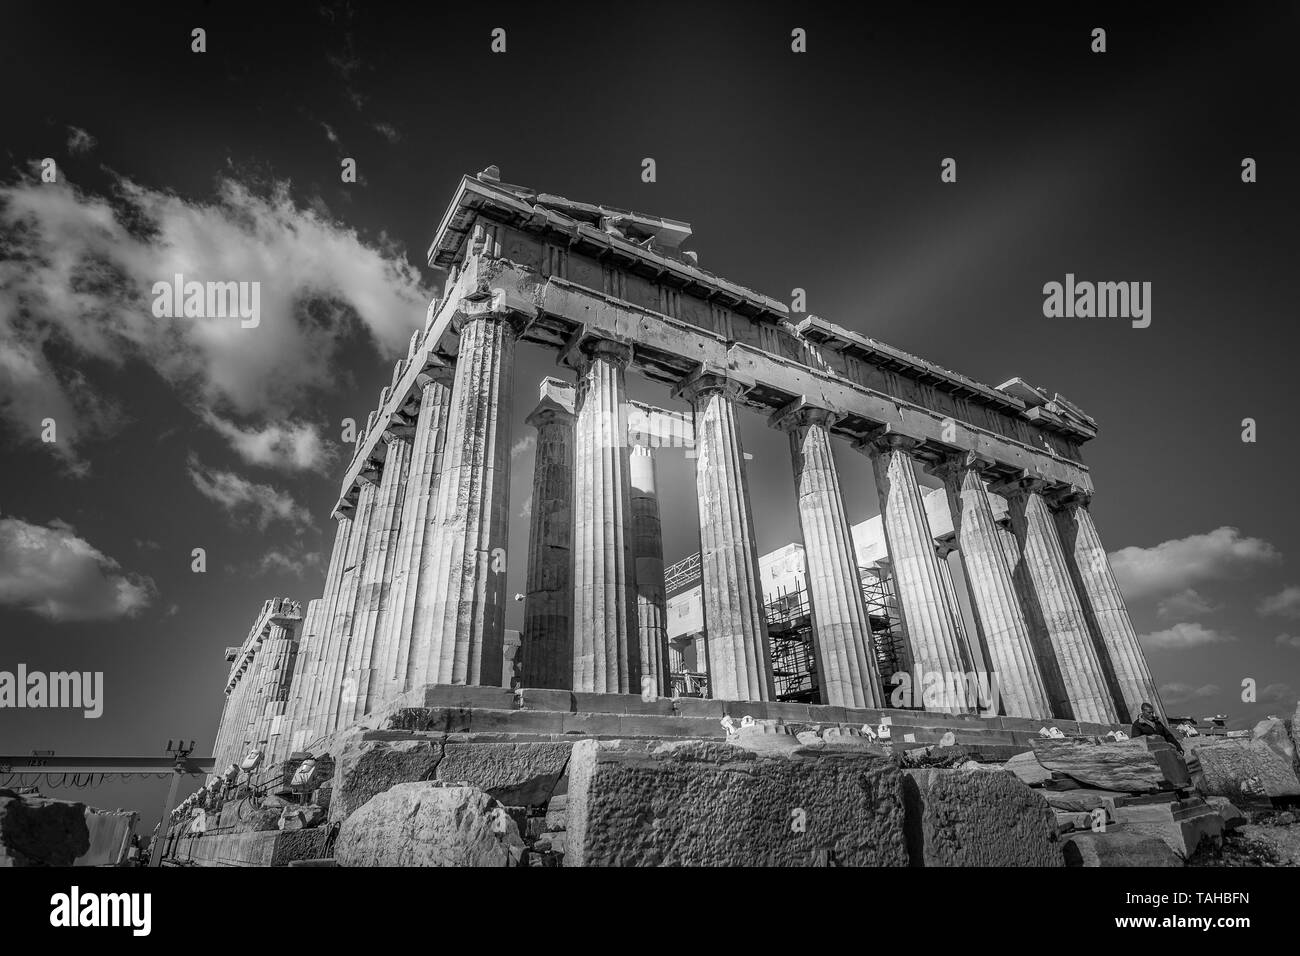 Black and white view of the eastern side of the Parthenon, Athens, Greece Stock Photo